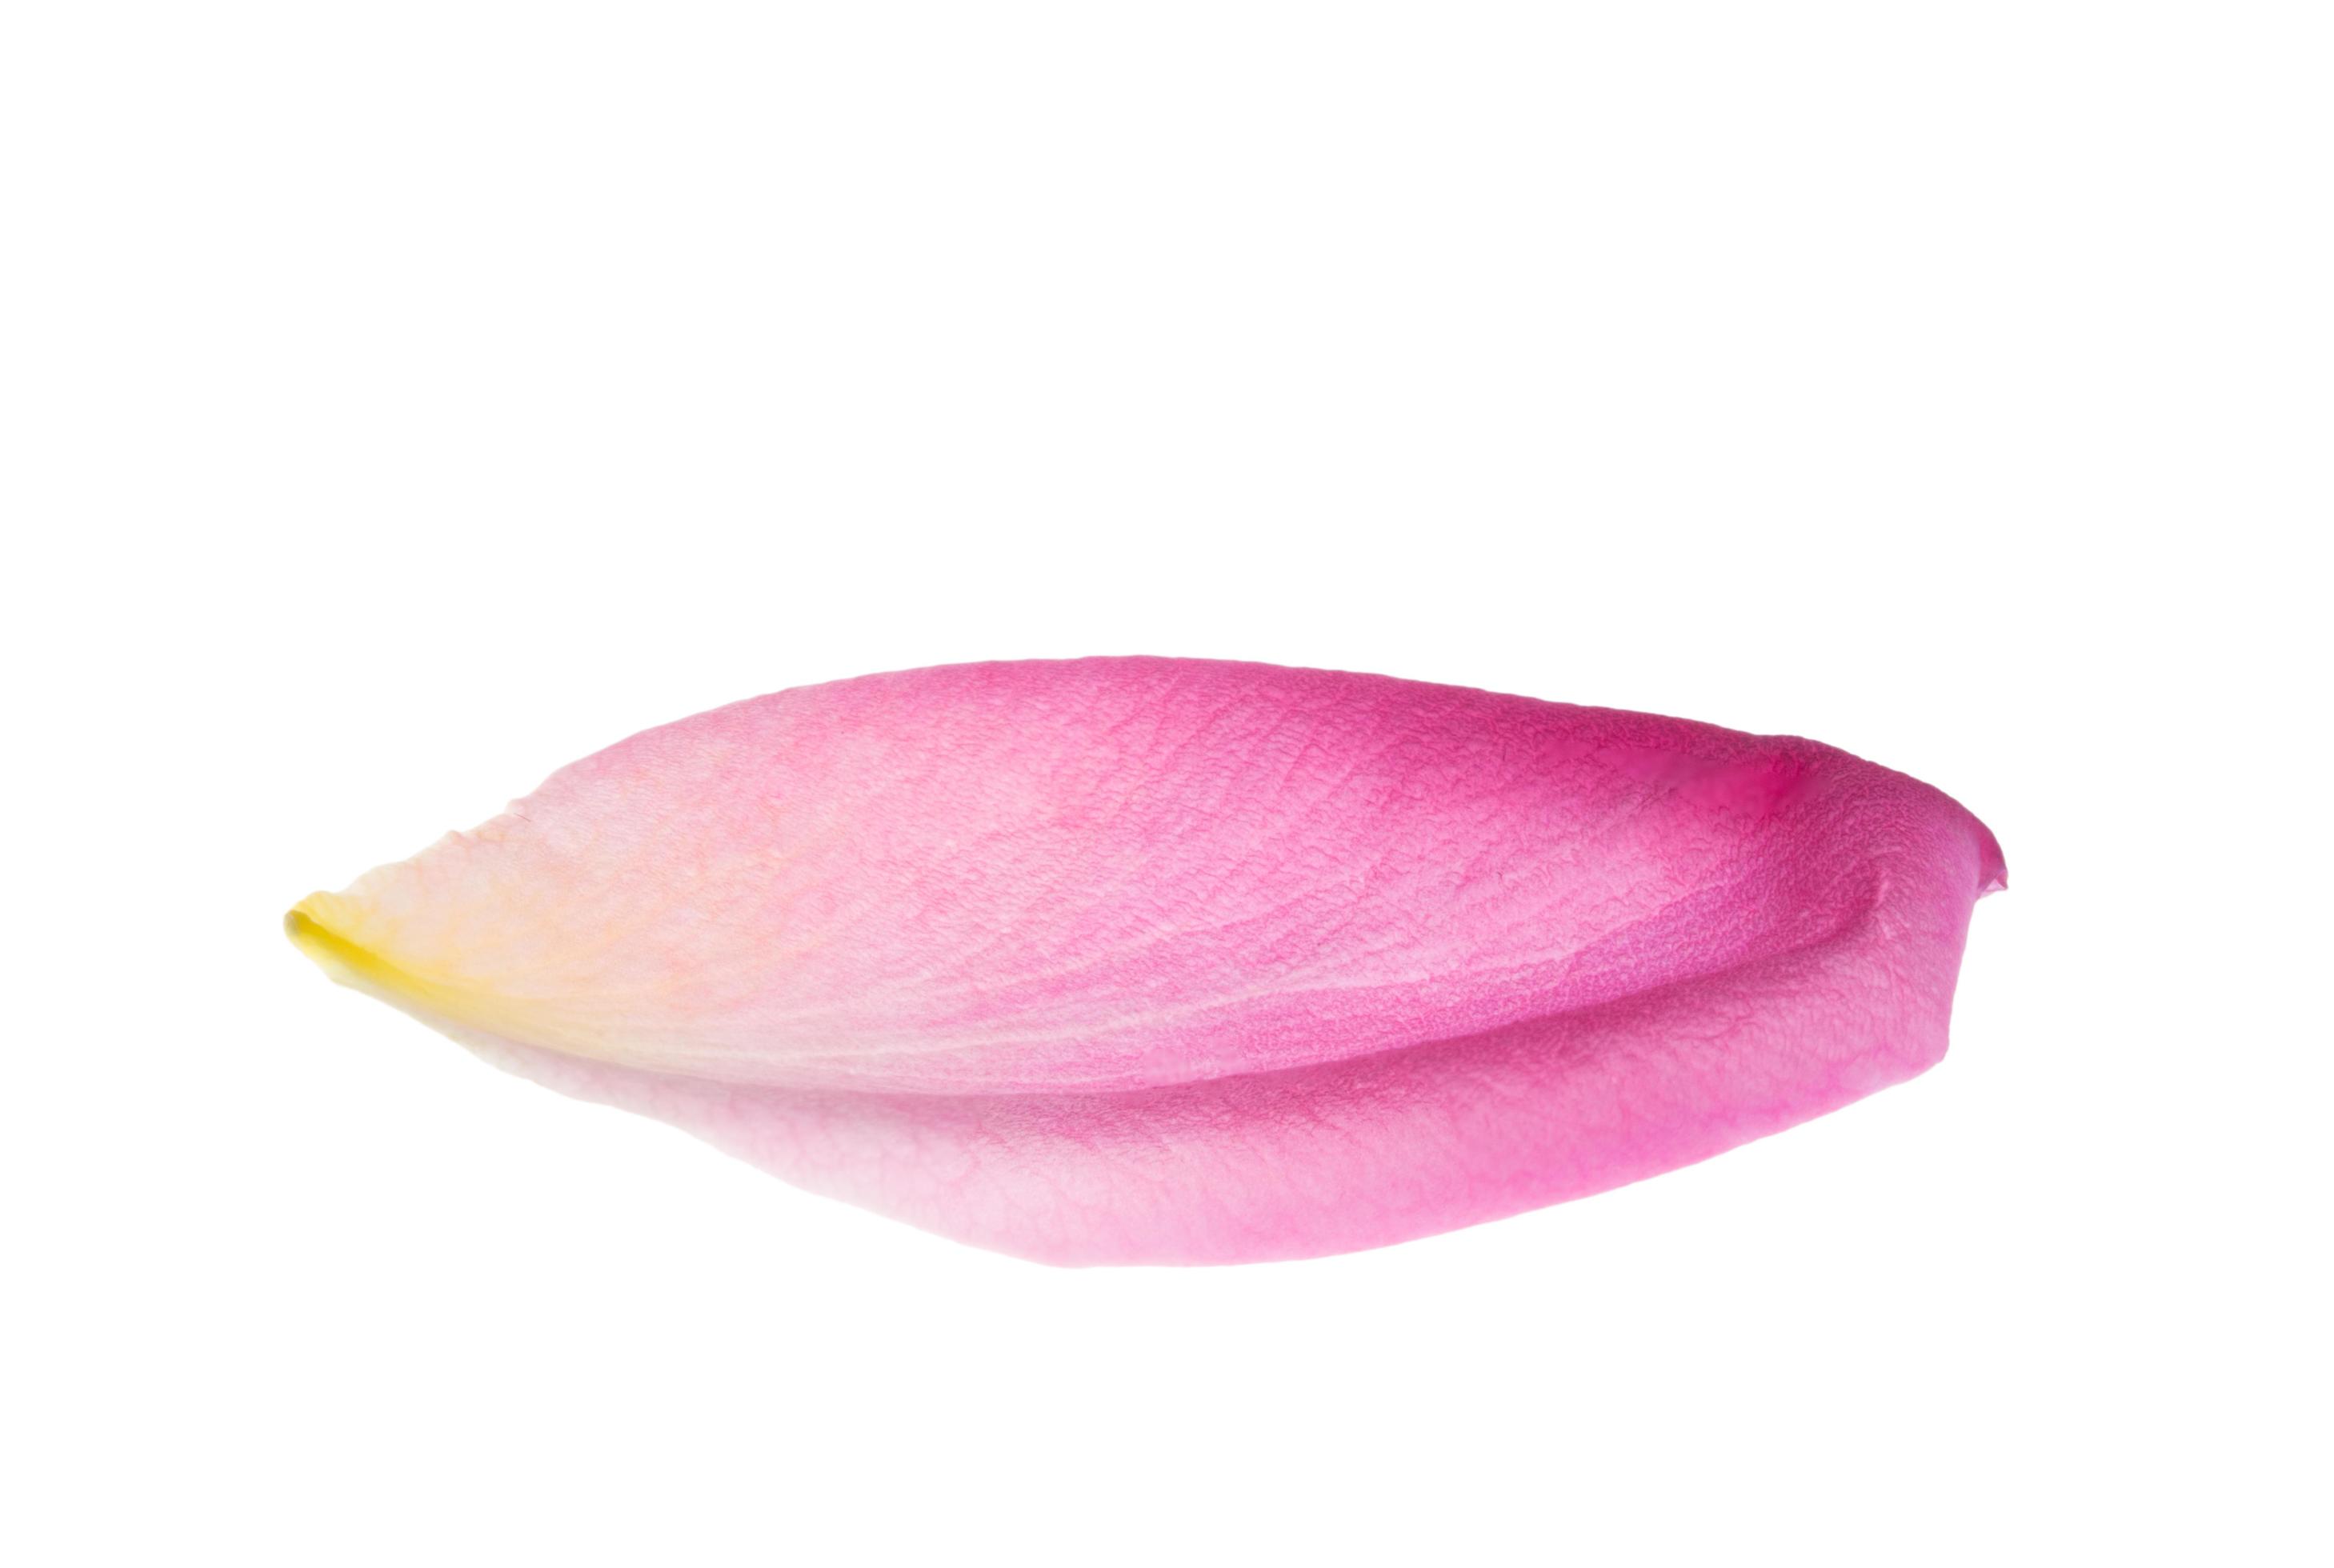 https://static.vecteezy.com/system/resources/previews/001/864/022/large_2x/pink-rose-petal-on-a-white-background-free-photo.jpg